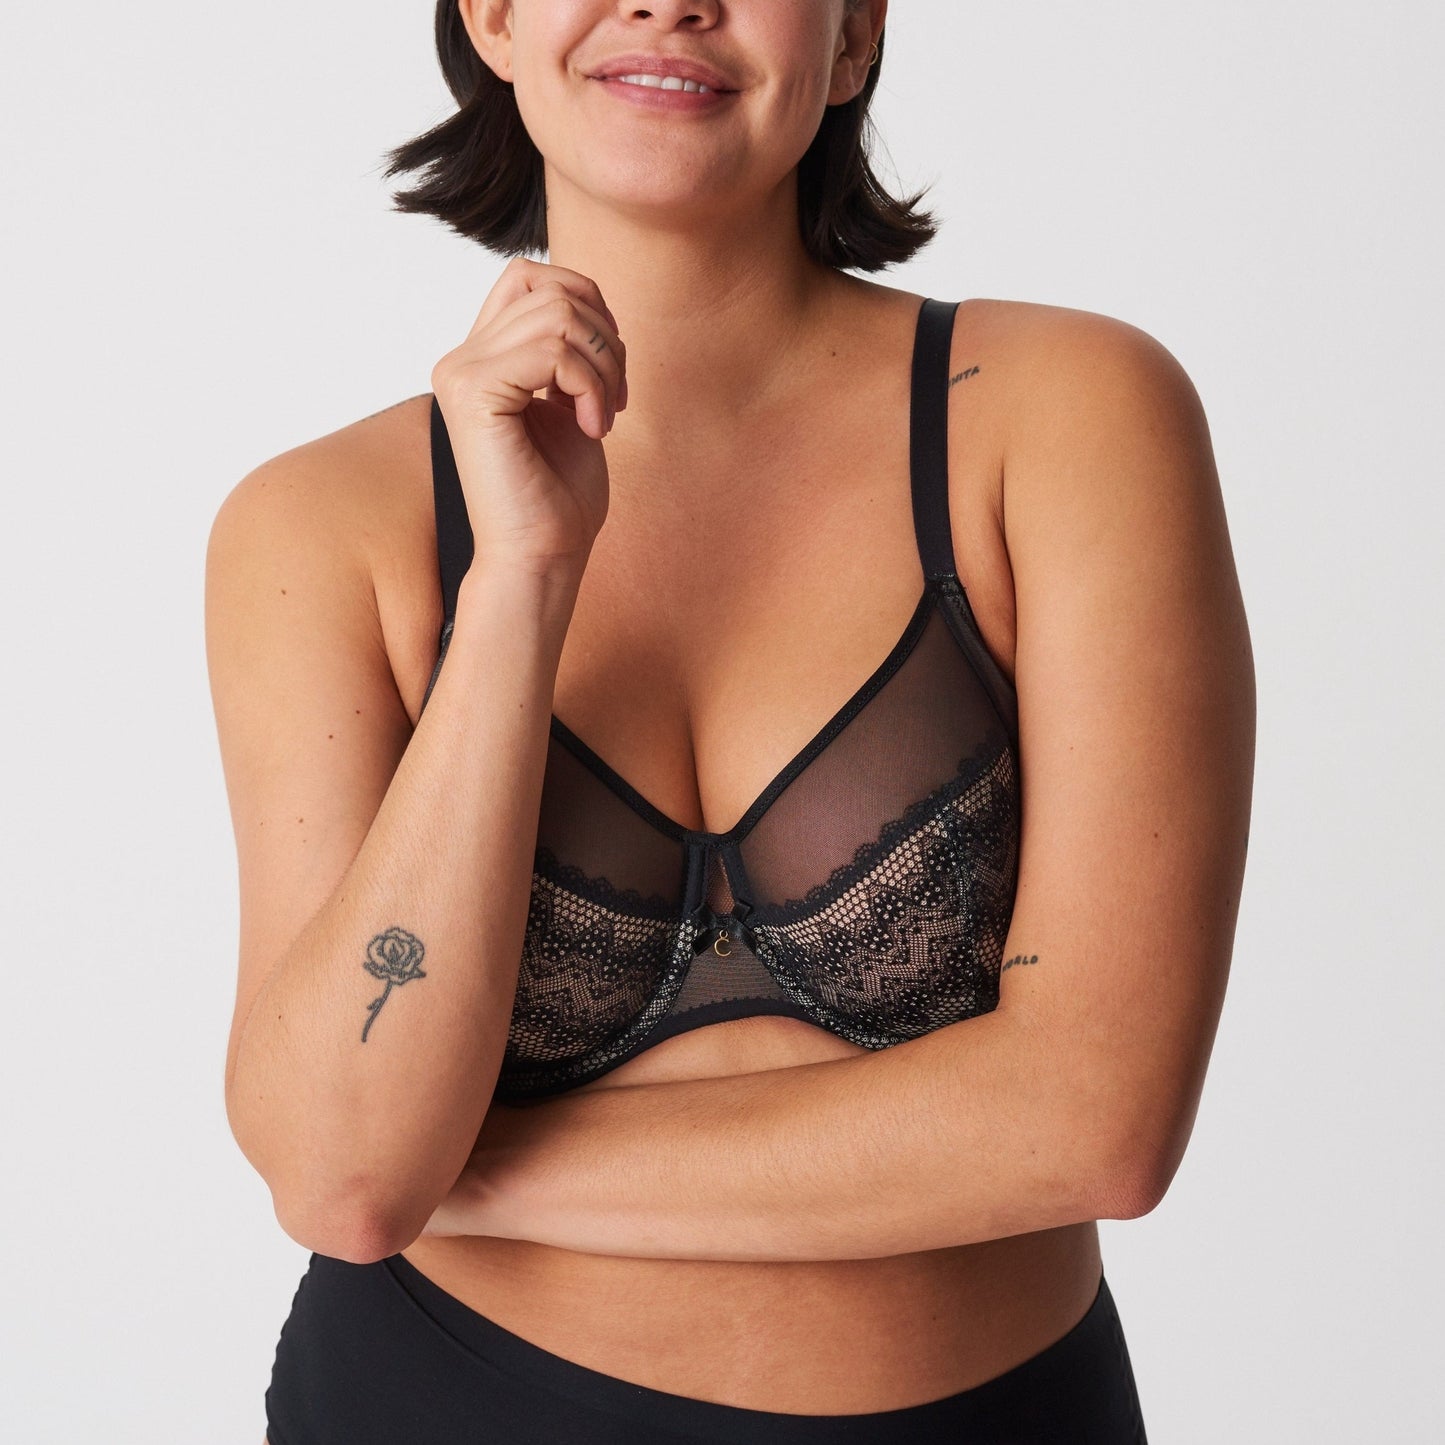 C C's Lingerie & Bridal Bras (MrBra.com) on X: Who has a P Cup bra? Only   Check our non-underwire bra collection. Click the  blue link below  #mrbra 🇺🇸👙🧝‍♀️   /